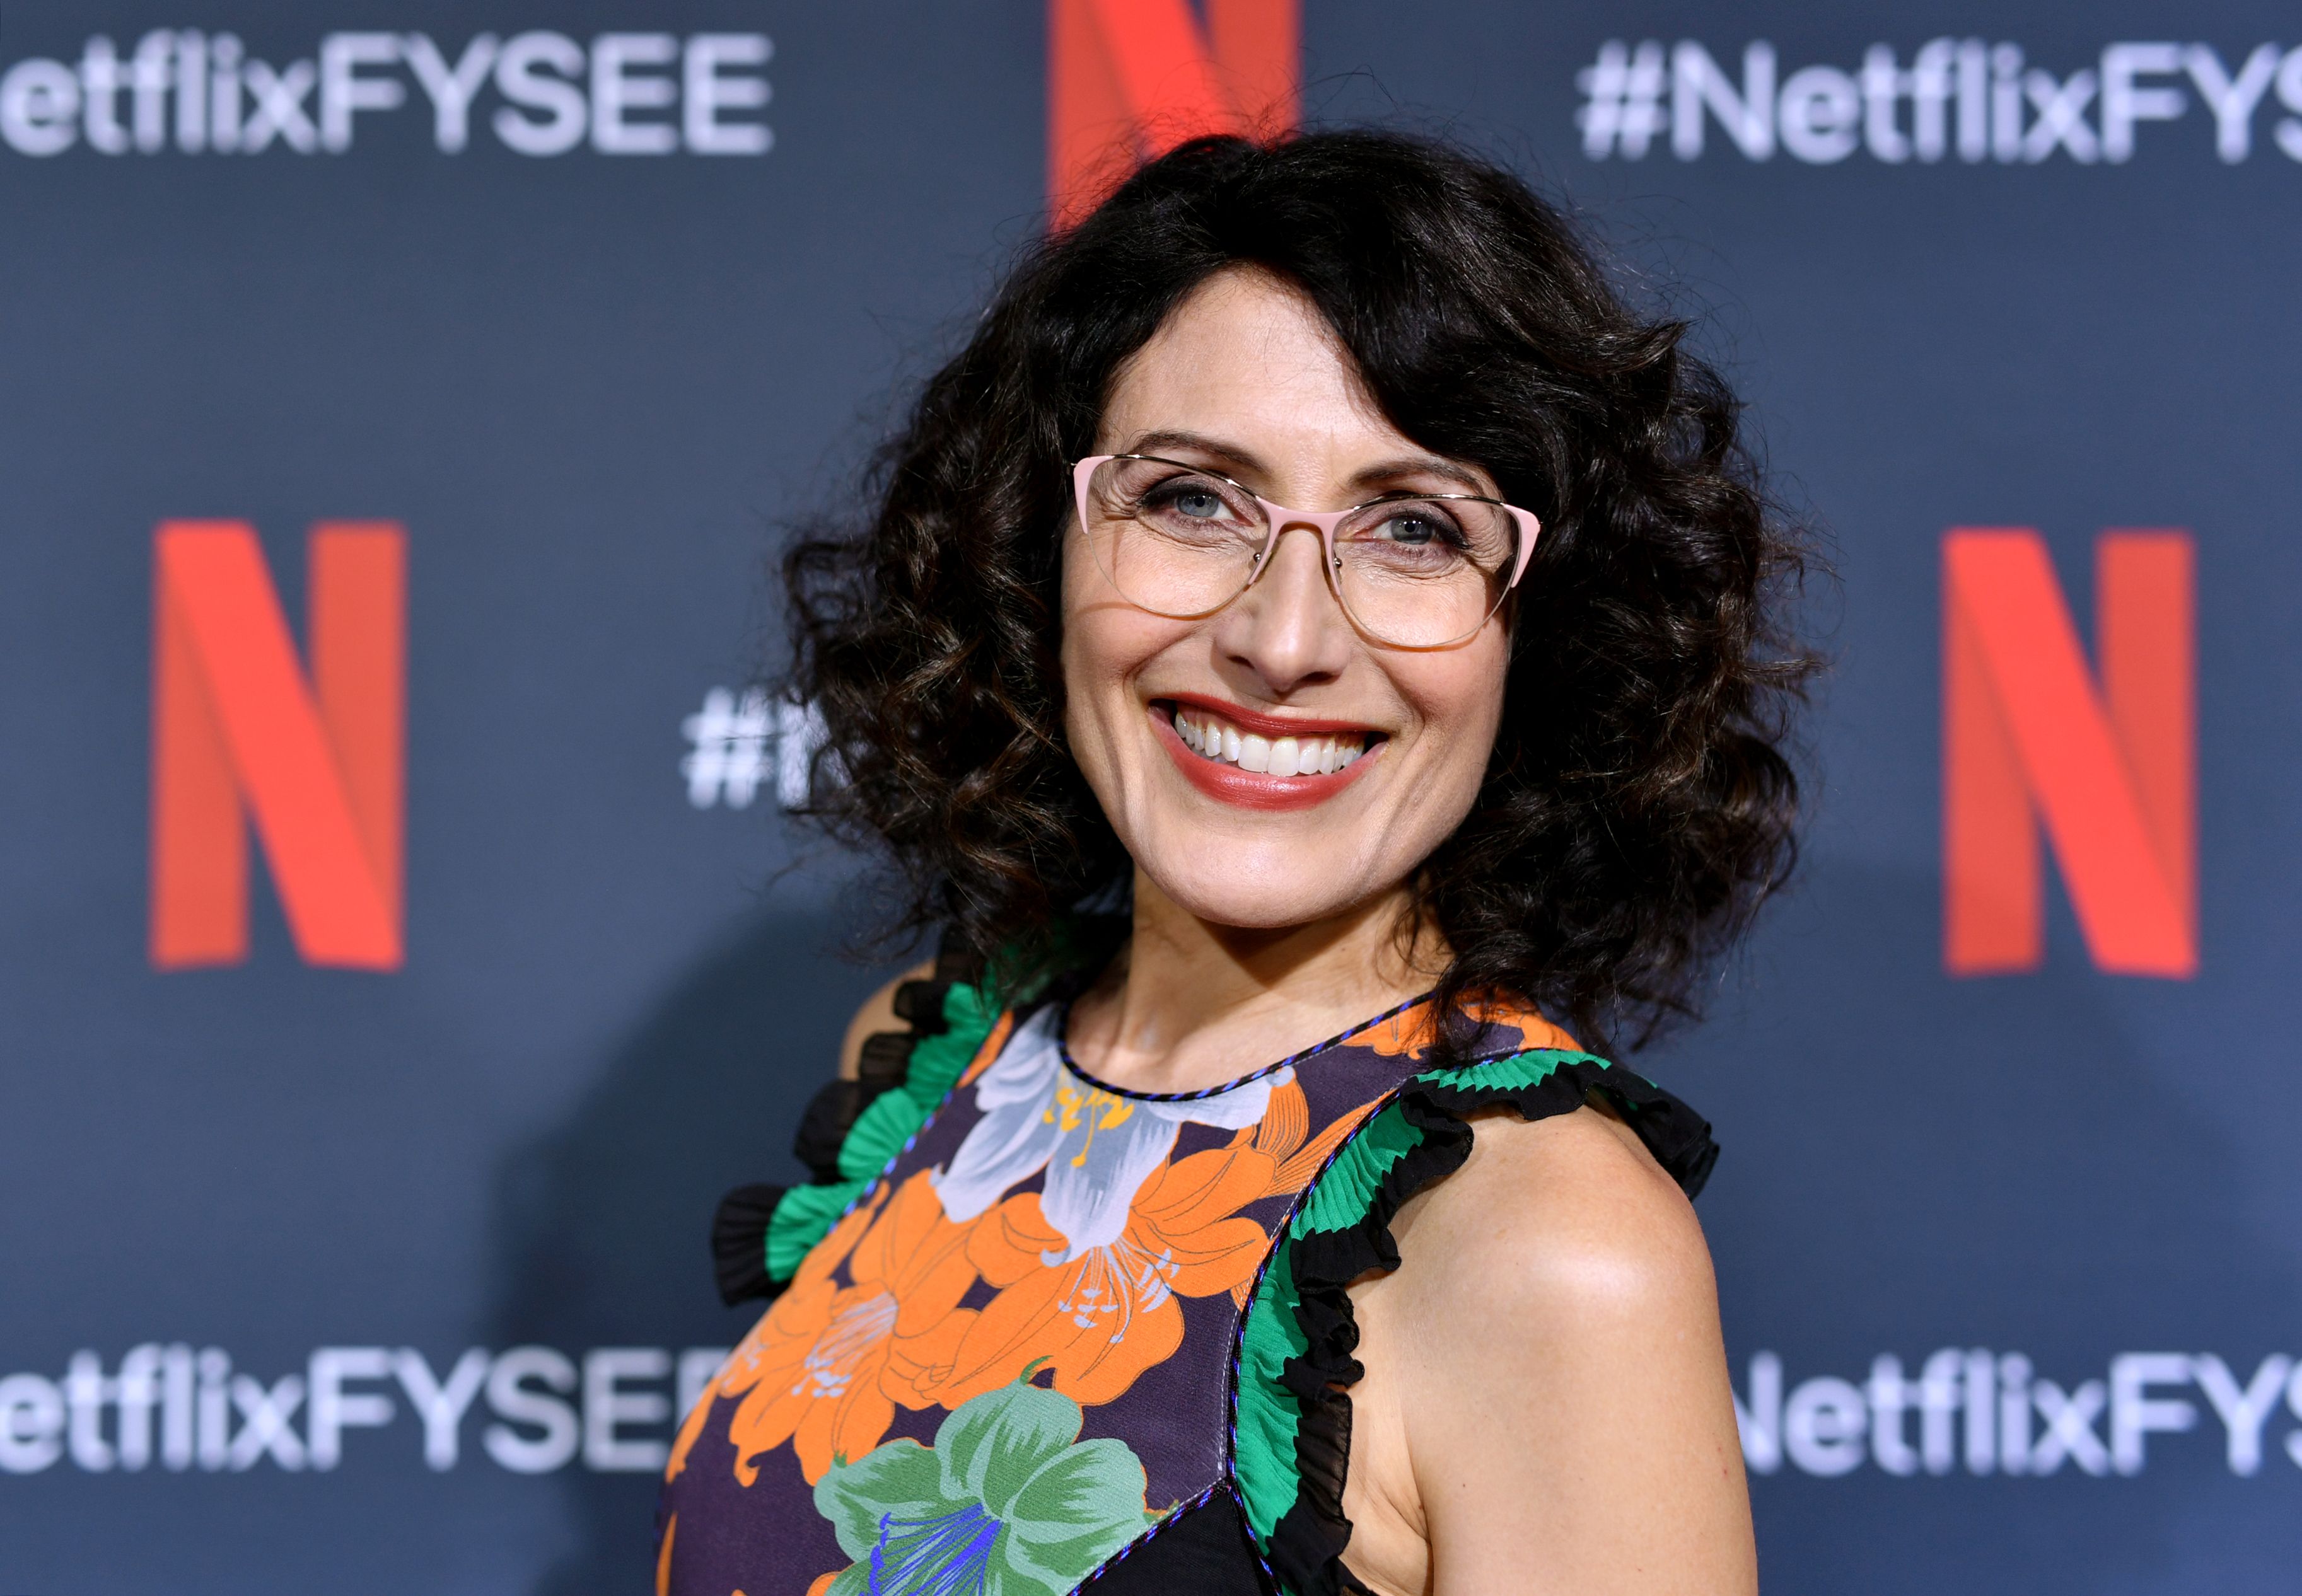 Lisa Edelstein attends the Netflix FYSEE Scene Stealer Panel at Raleigh Studios on May 30, 2019 in Los Angeles, California. | Source: Getty Images